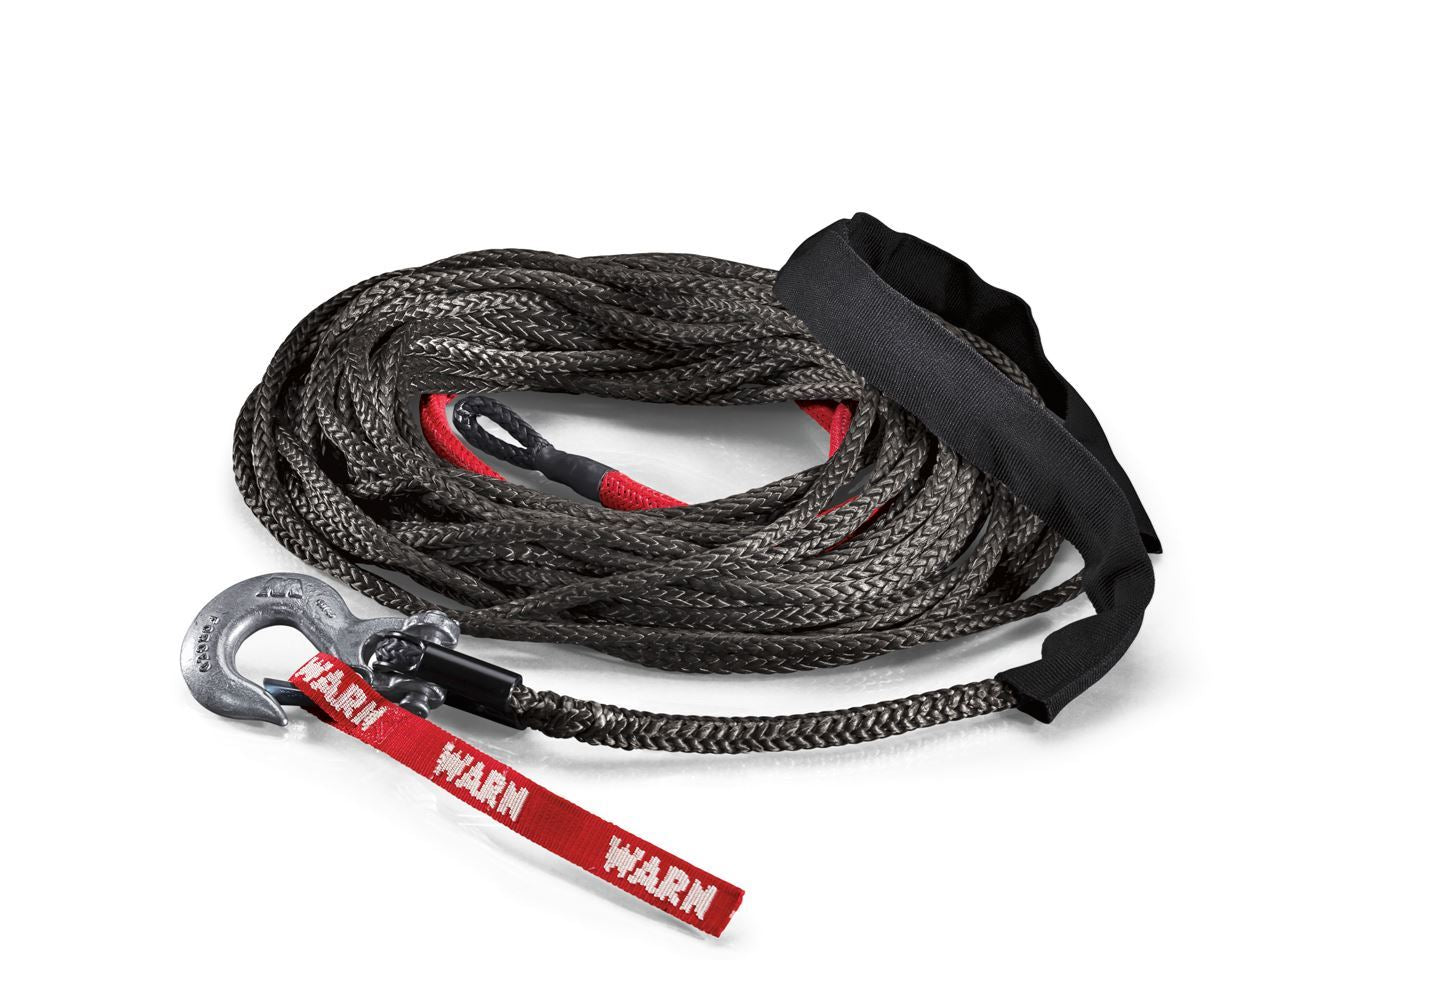 WARN Spydura Synthetic Winch Rope 3/8in - 100ft